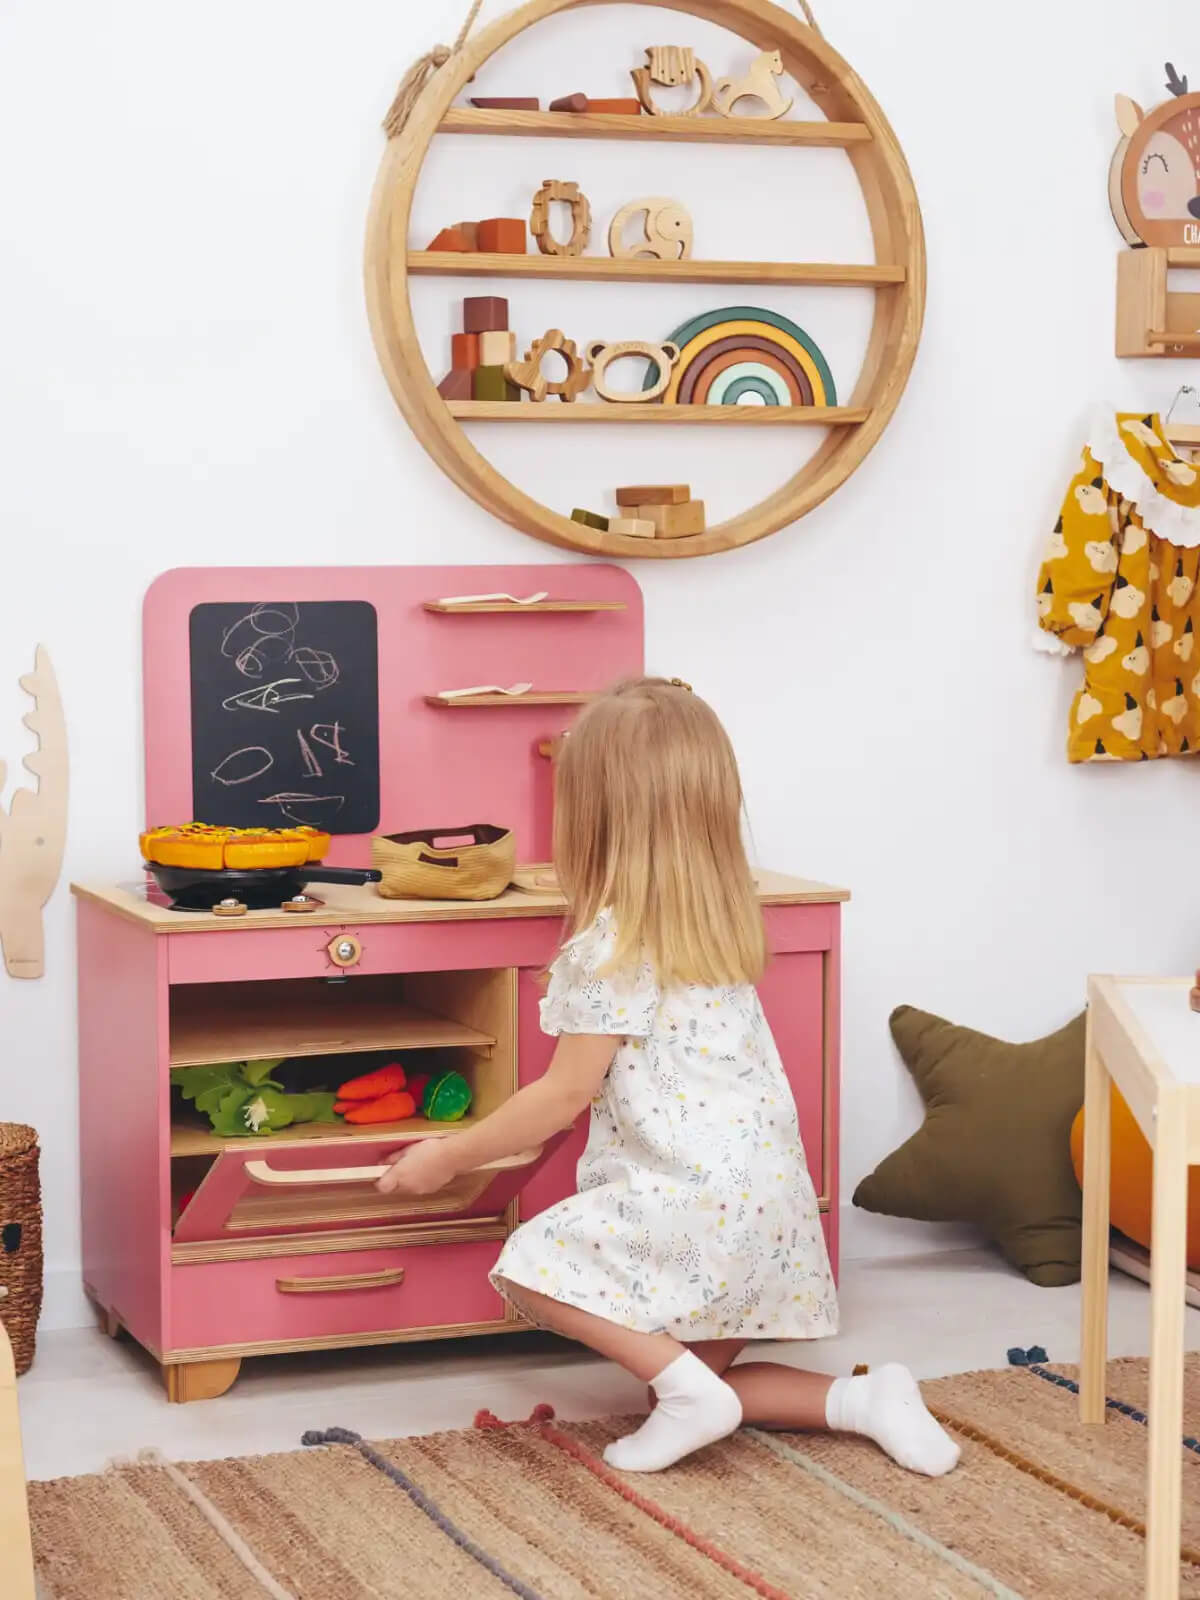 Importance of Kitchen Pretend Play for Kids